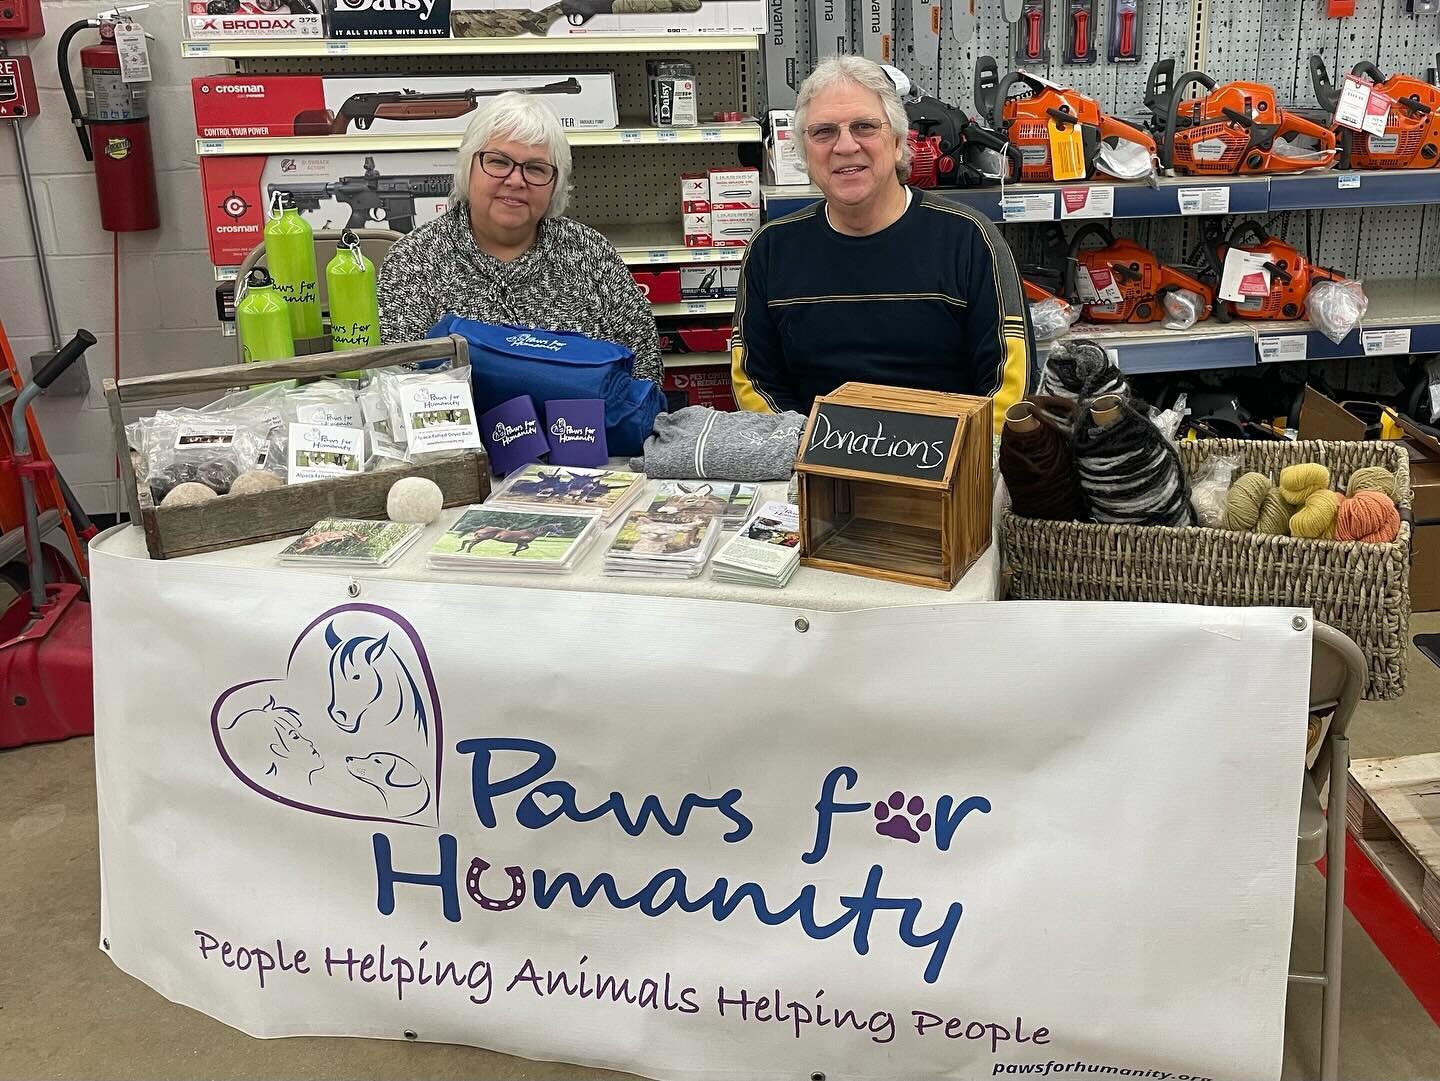 Good morning!  We&rsquo;re up at TSC in Stevensville today for their Relief for Rescues community program. The vet clinic is open so we&rsquo;re enjoying seeing all the neighborhood  pups come out!  Stop by and say hi!  #Animaltherapy  #Animalsanctua